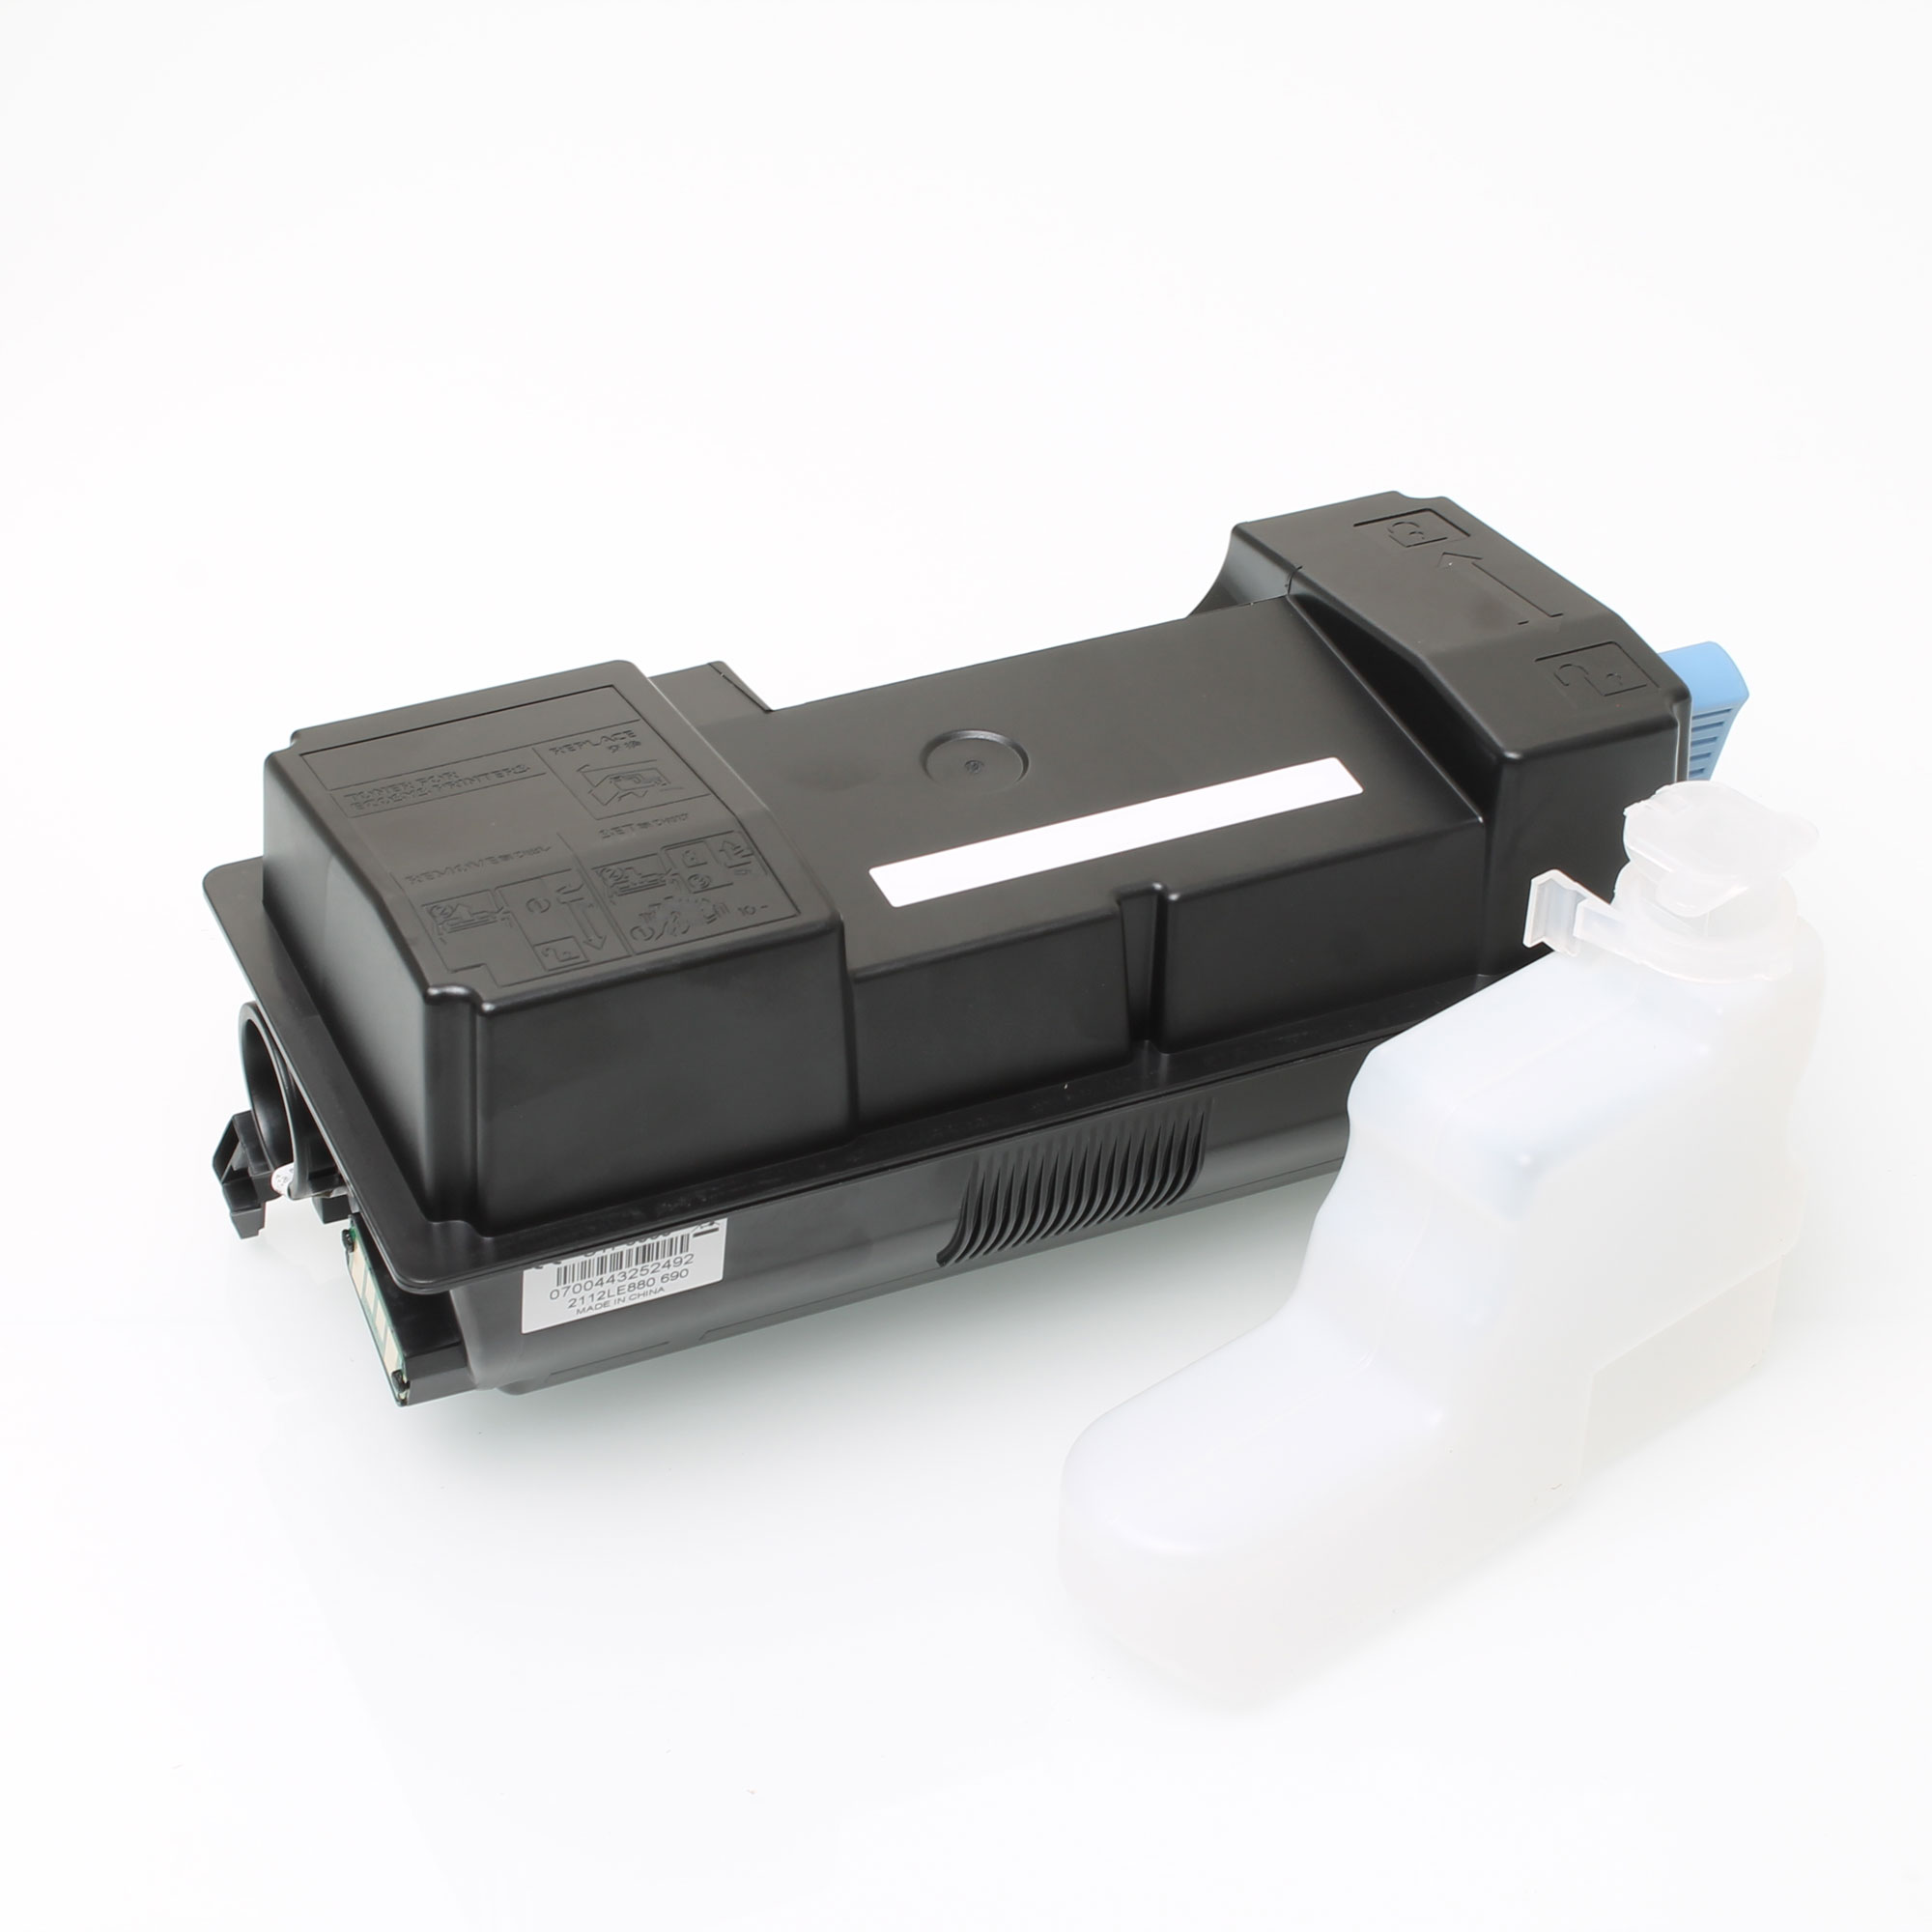 Bedre billet overgive ABCToner - Compatible Toner For Utax 4436010010 For Utax P 5030dn Utax P  5035i MFP Utax P 6030dn Utax P 6035i MFP by ABC